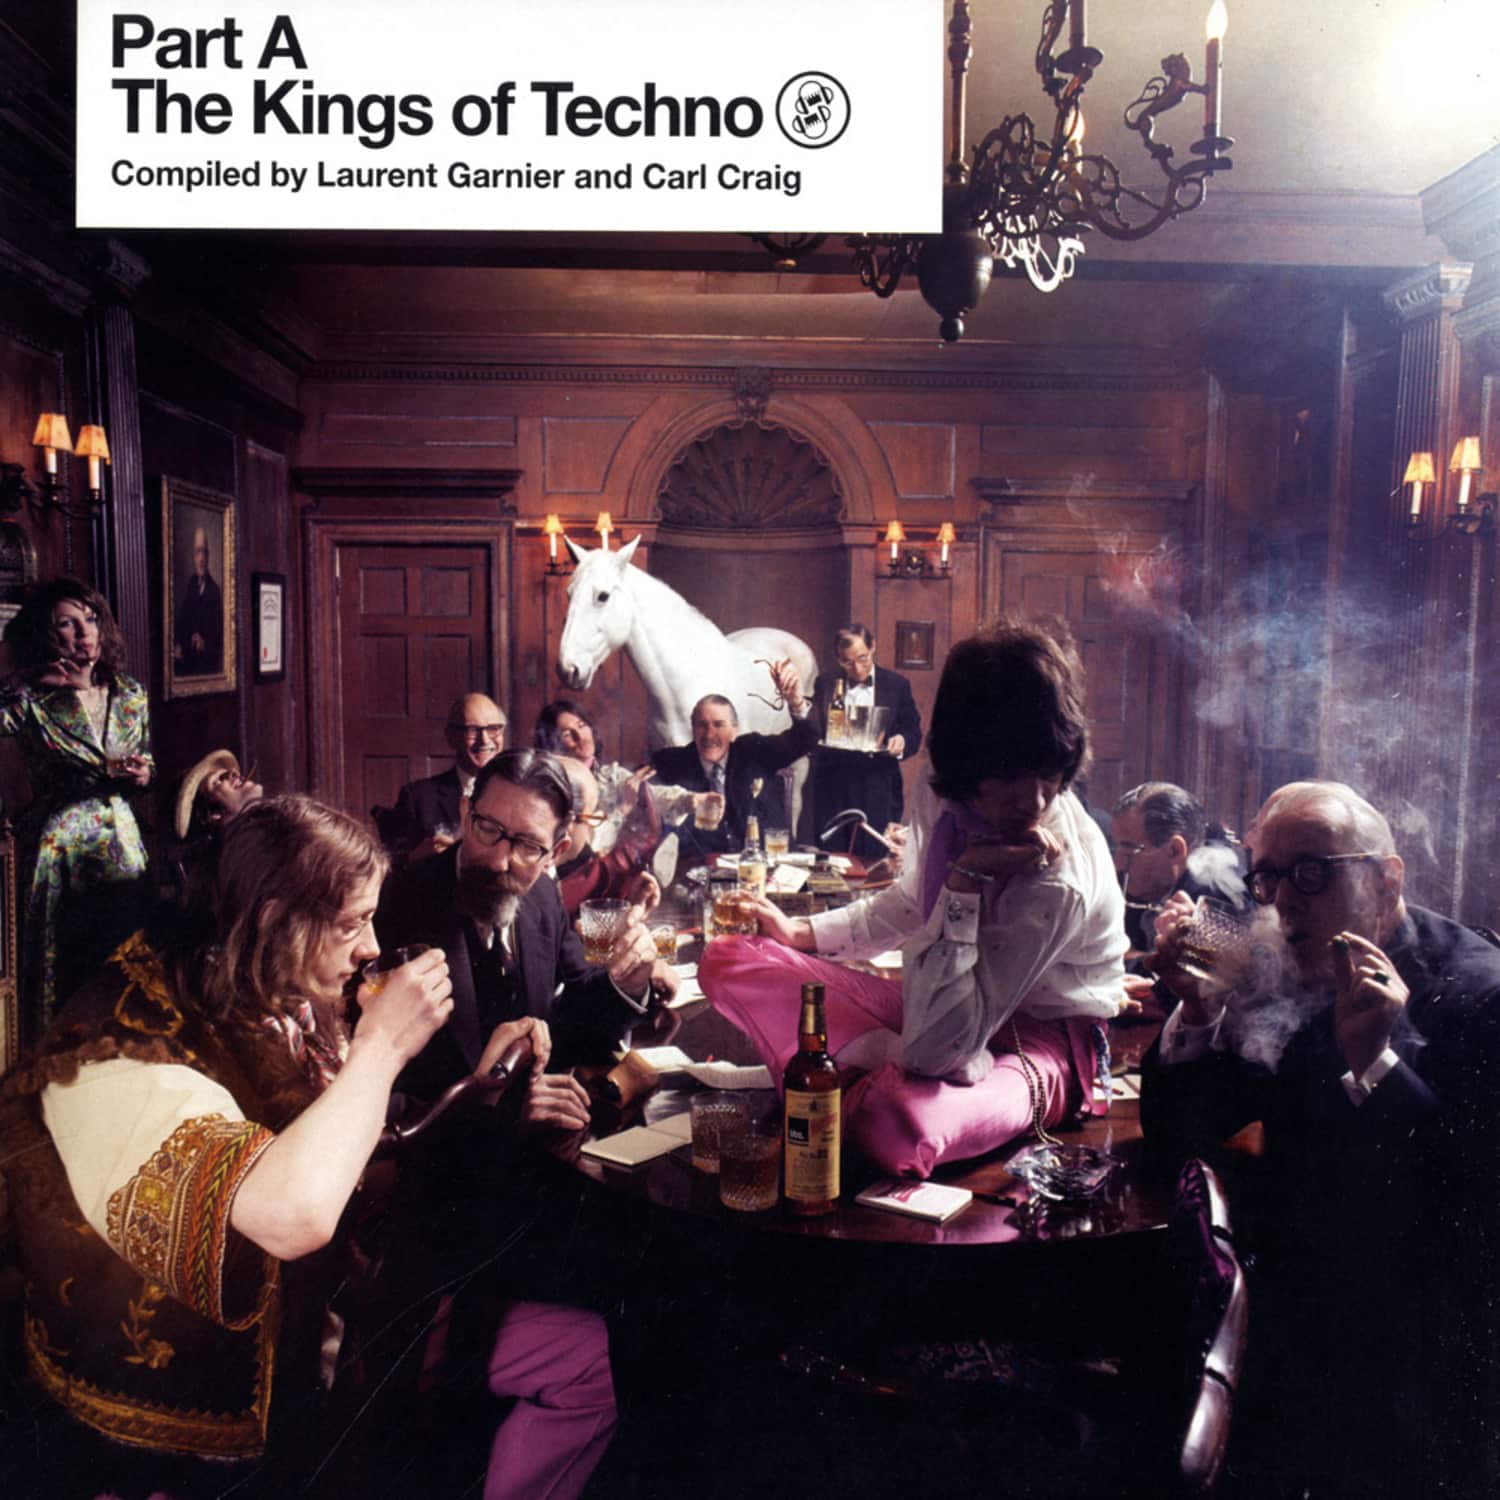 V/a Compiled By Laurent Garnier & Carl Craig - PT 1 THE KINGS OF TECHNIO 